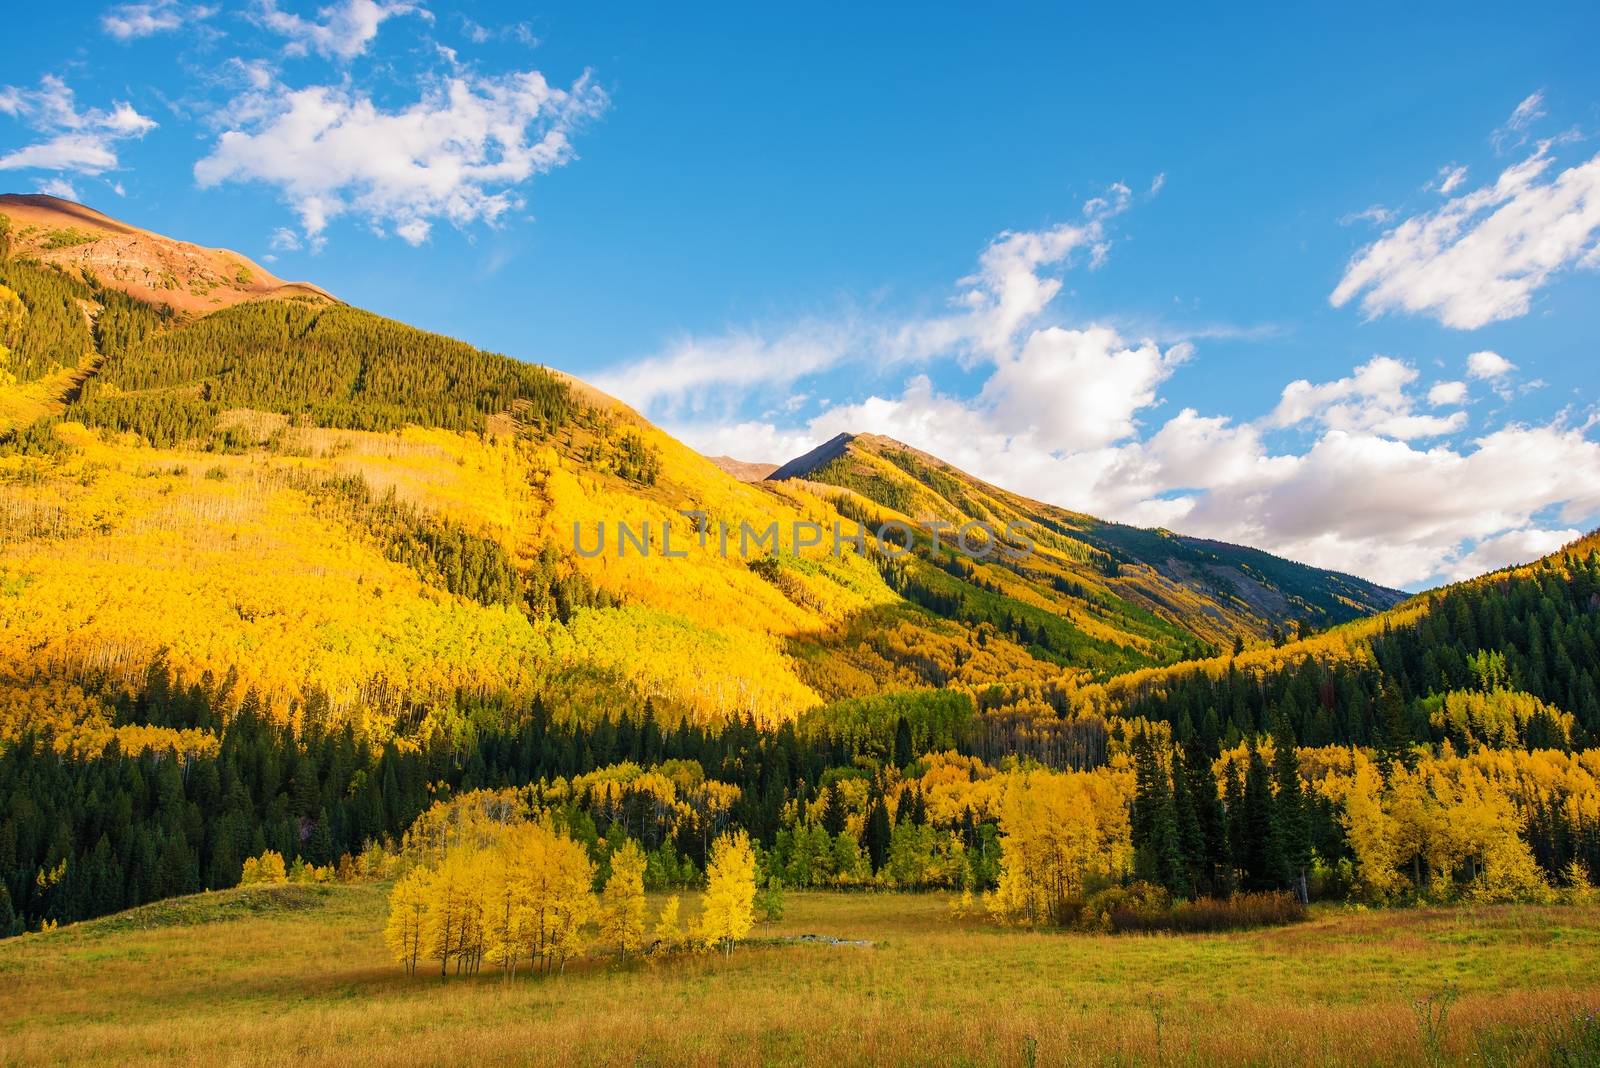 Colorful Colorado Lands. Fall in the Rocky Mountains. Colorado, United States.